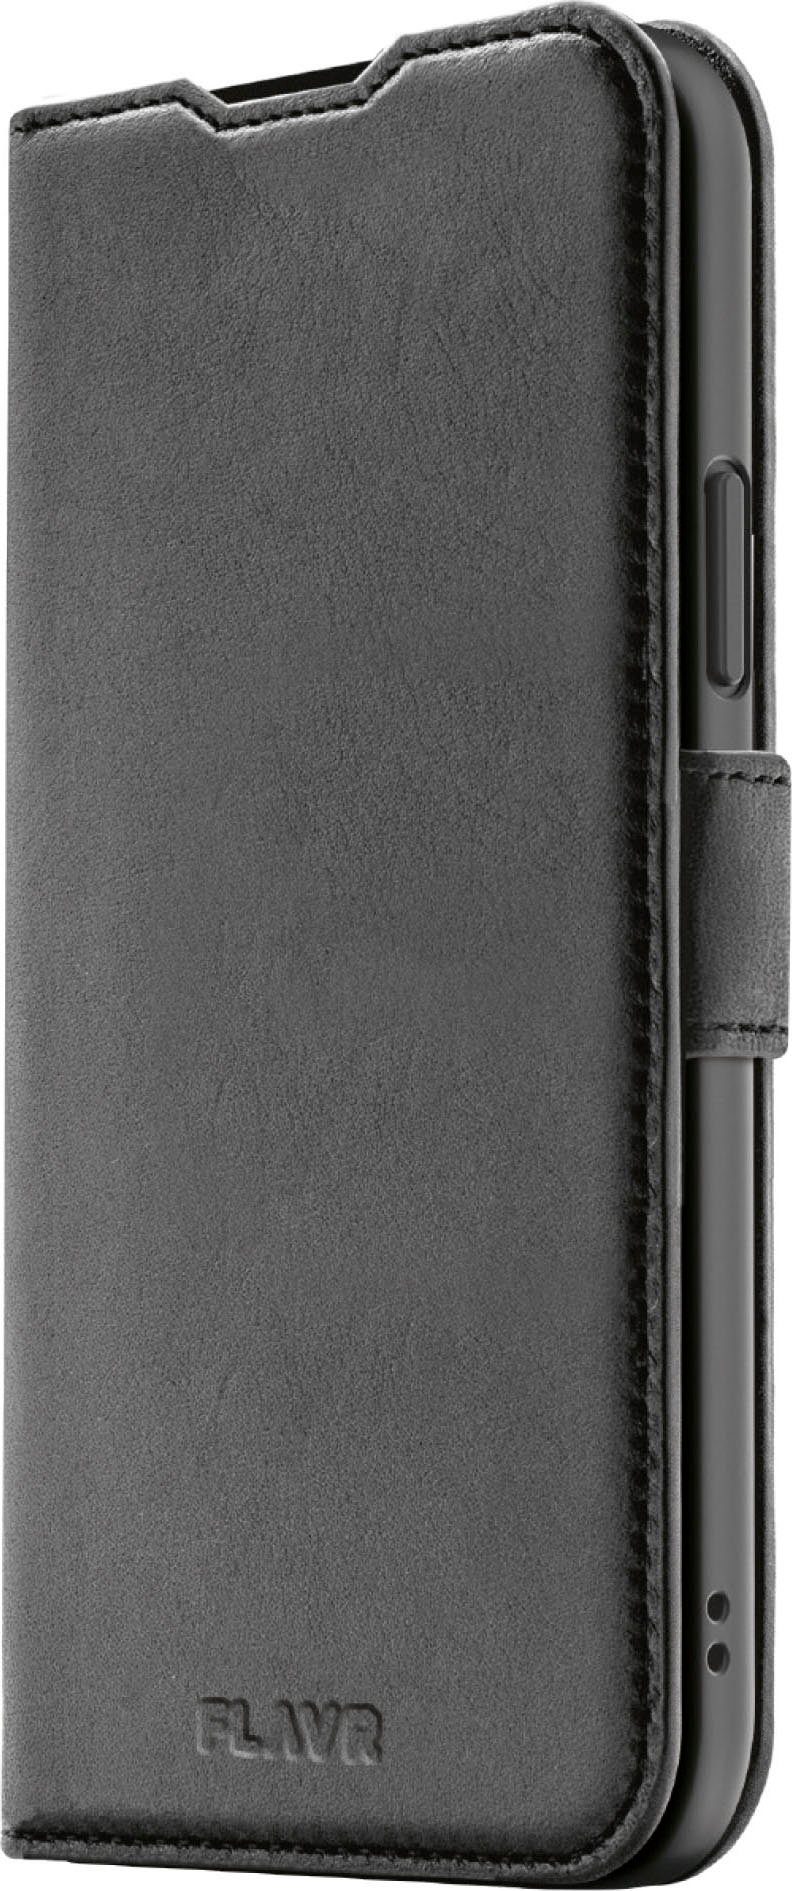 adidas Originals Backcover FLAVR Leather Case Recycled Wallet